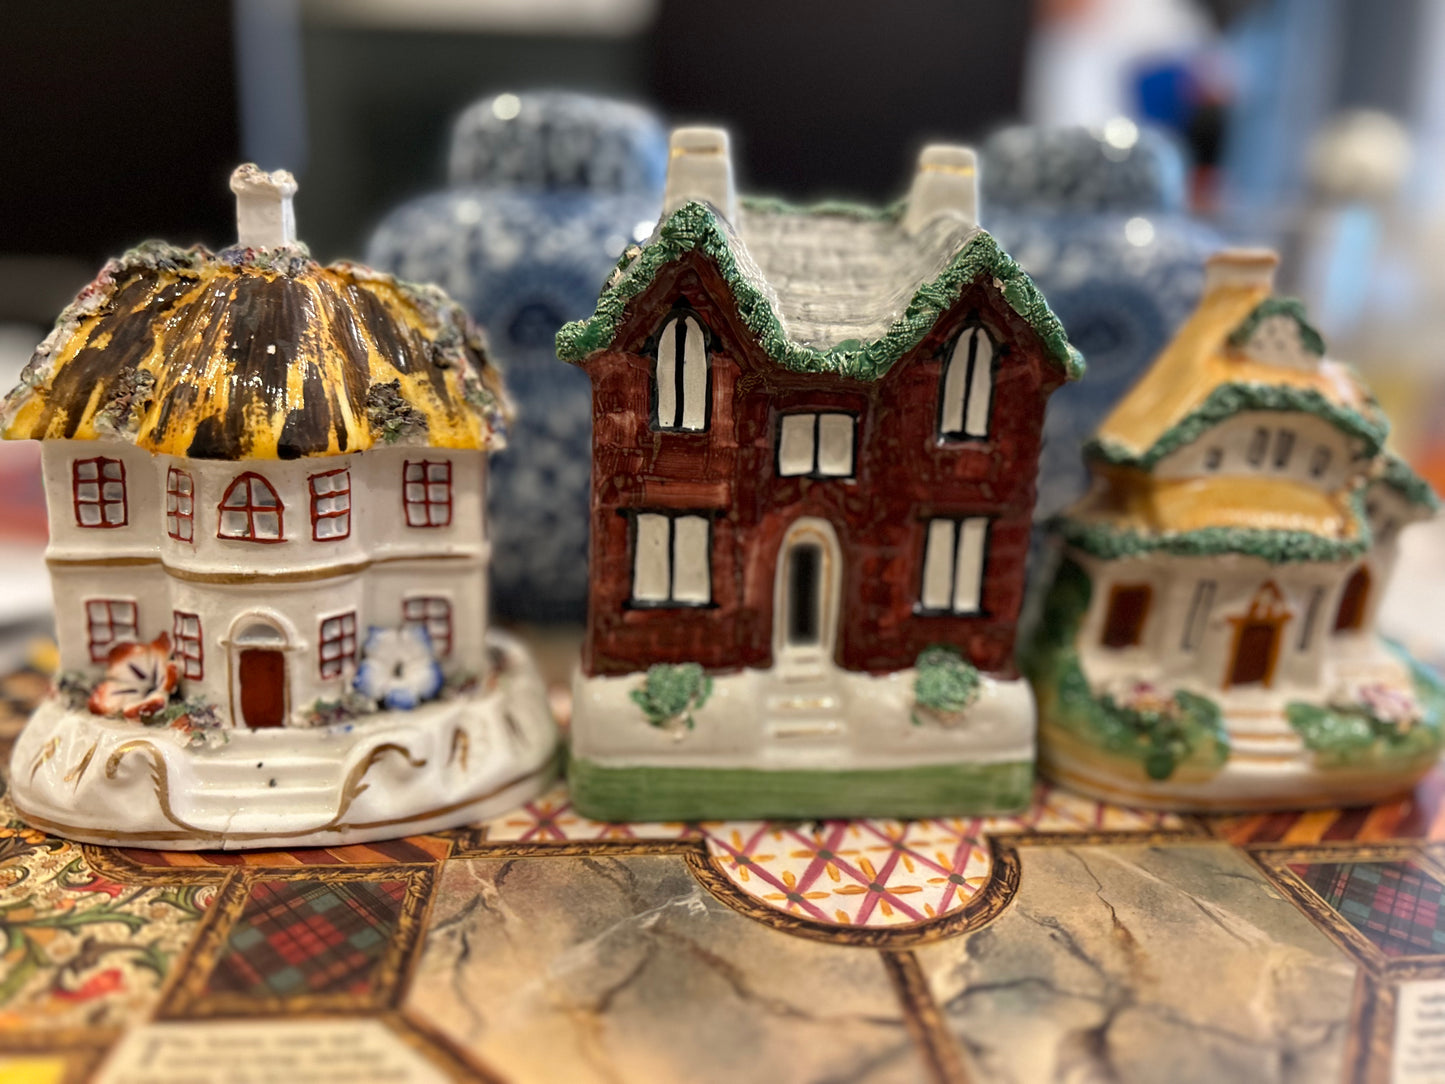 Antique Staffordshire cottage with a slot in back for Coins!